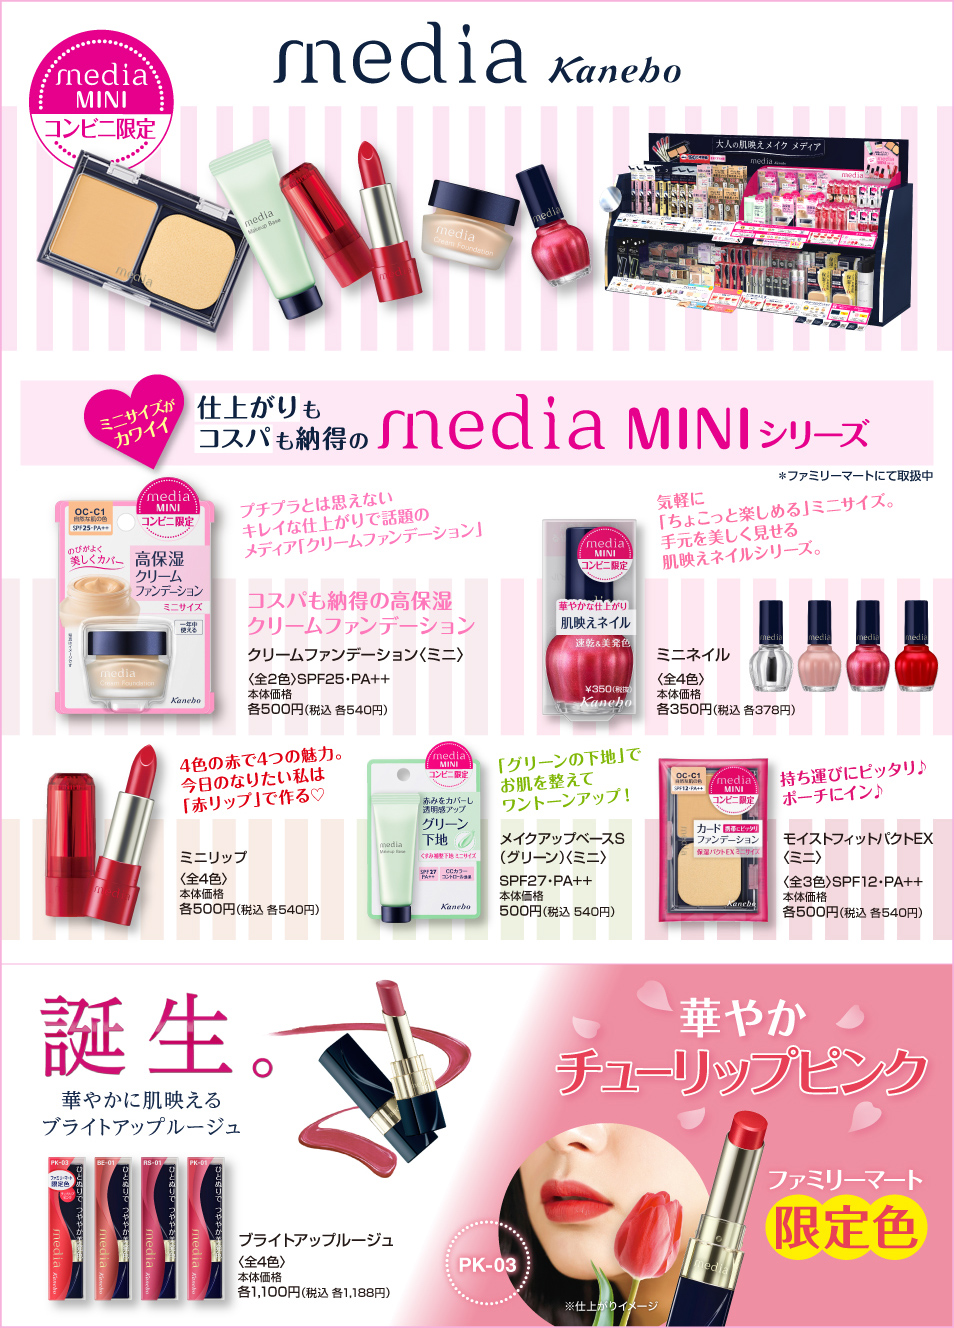 http://www.family.co.jp/content/dam/family/goods_images/cosmetics/media19SS_FMHP_0207.jpg